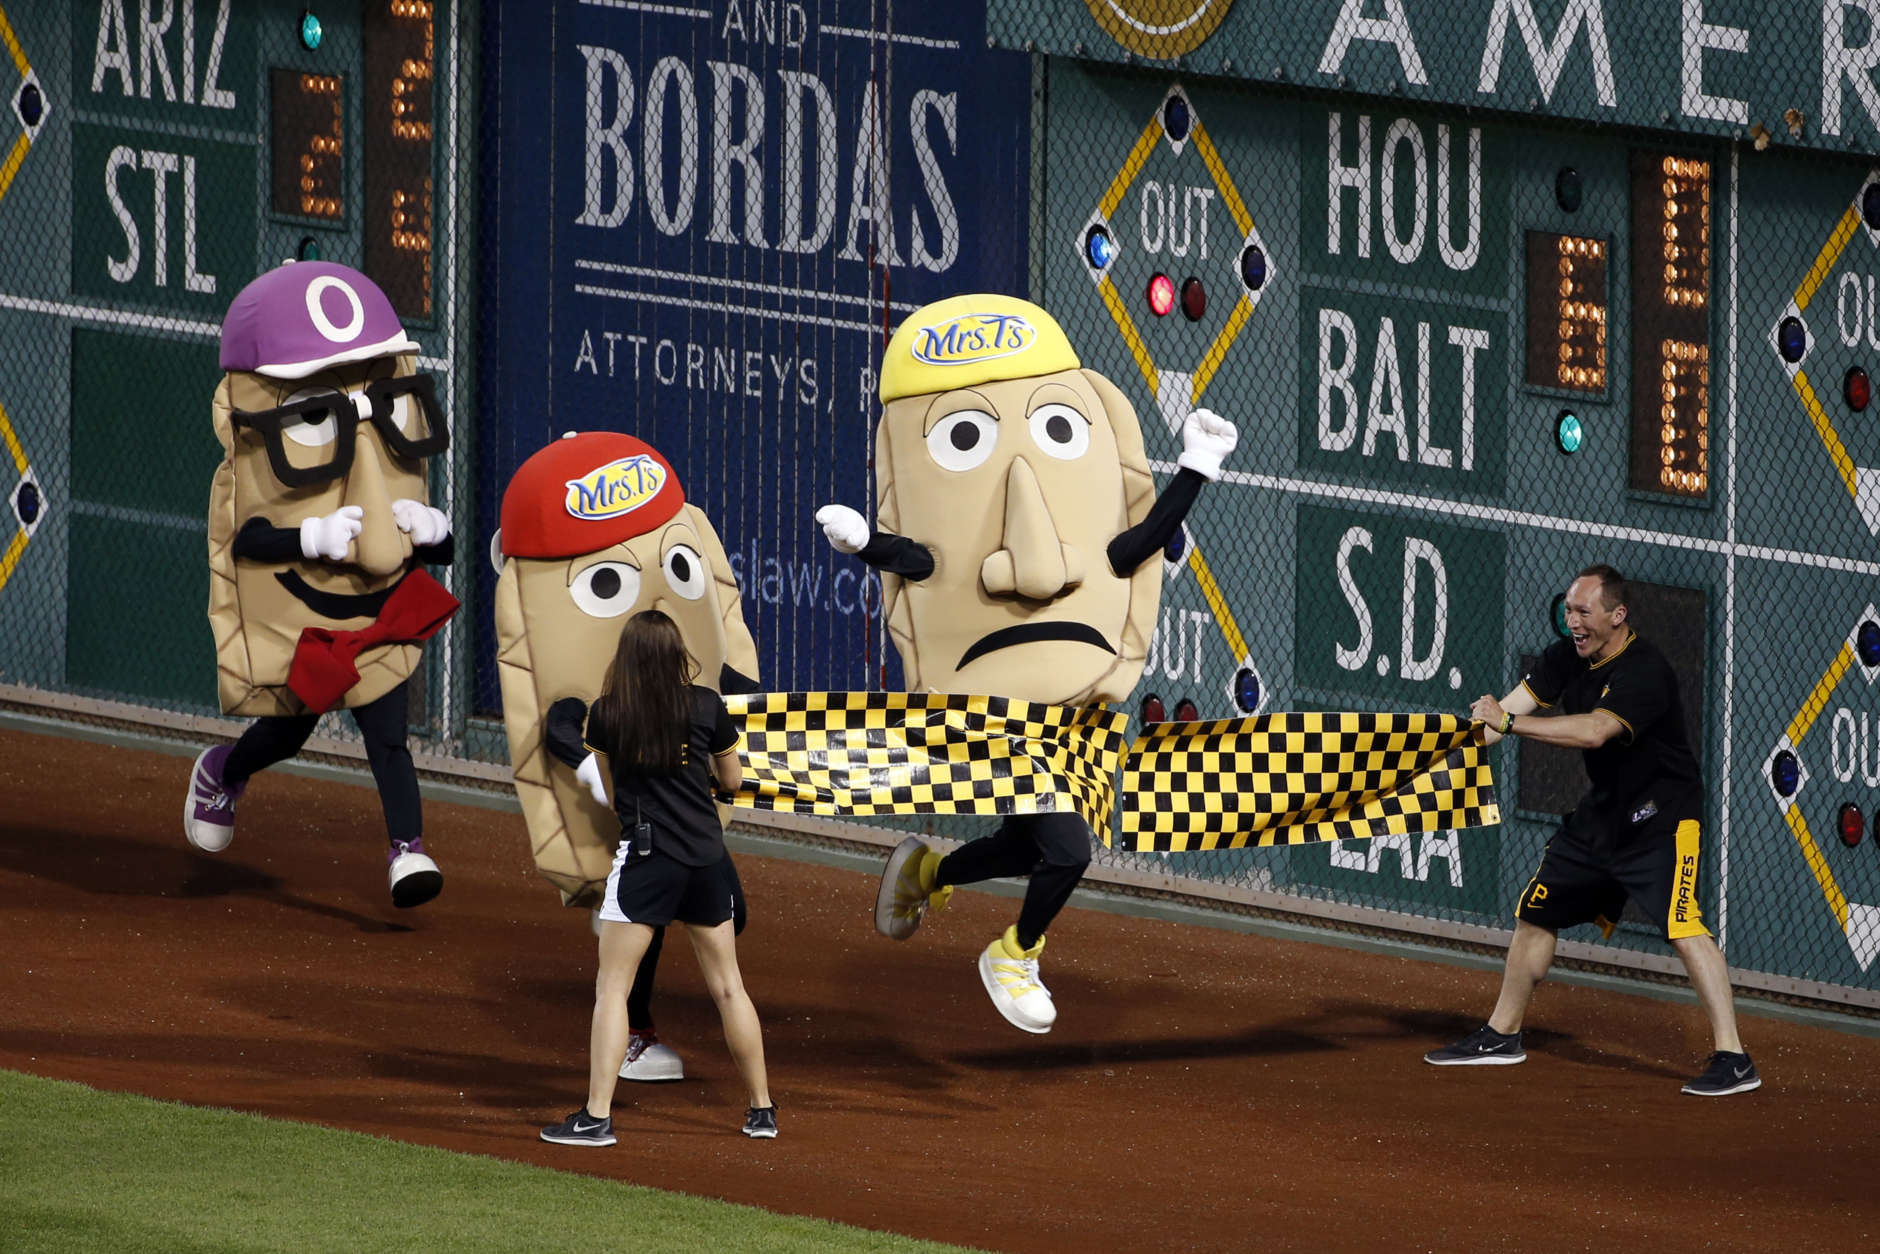 Cheese Chester breaks the tape to win the Pierogi Race between innings of a baseball game at PNC Park in Pittsburgh, between the Pittsburgh Pirates and the Miami Marlins, Tuesday, May 26, 2015. The Pirates won 5-1. (AP Photo/Gene J. Puskar)